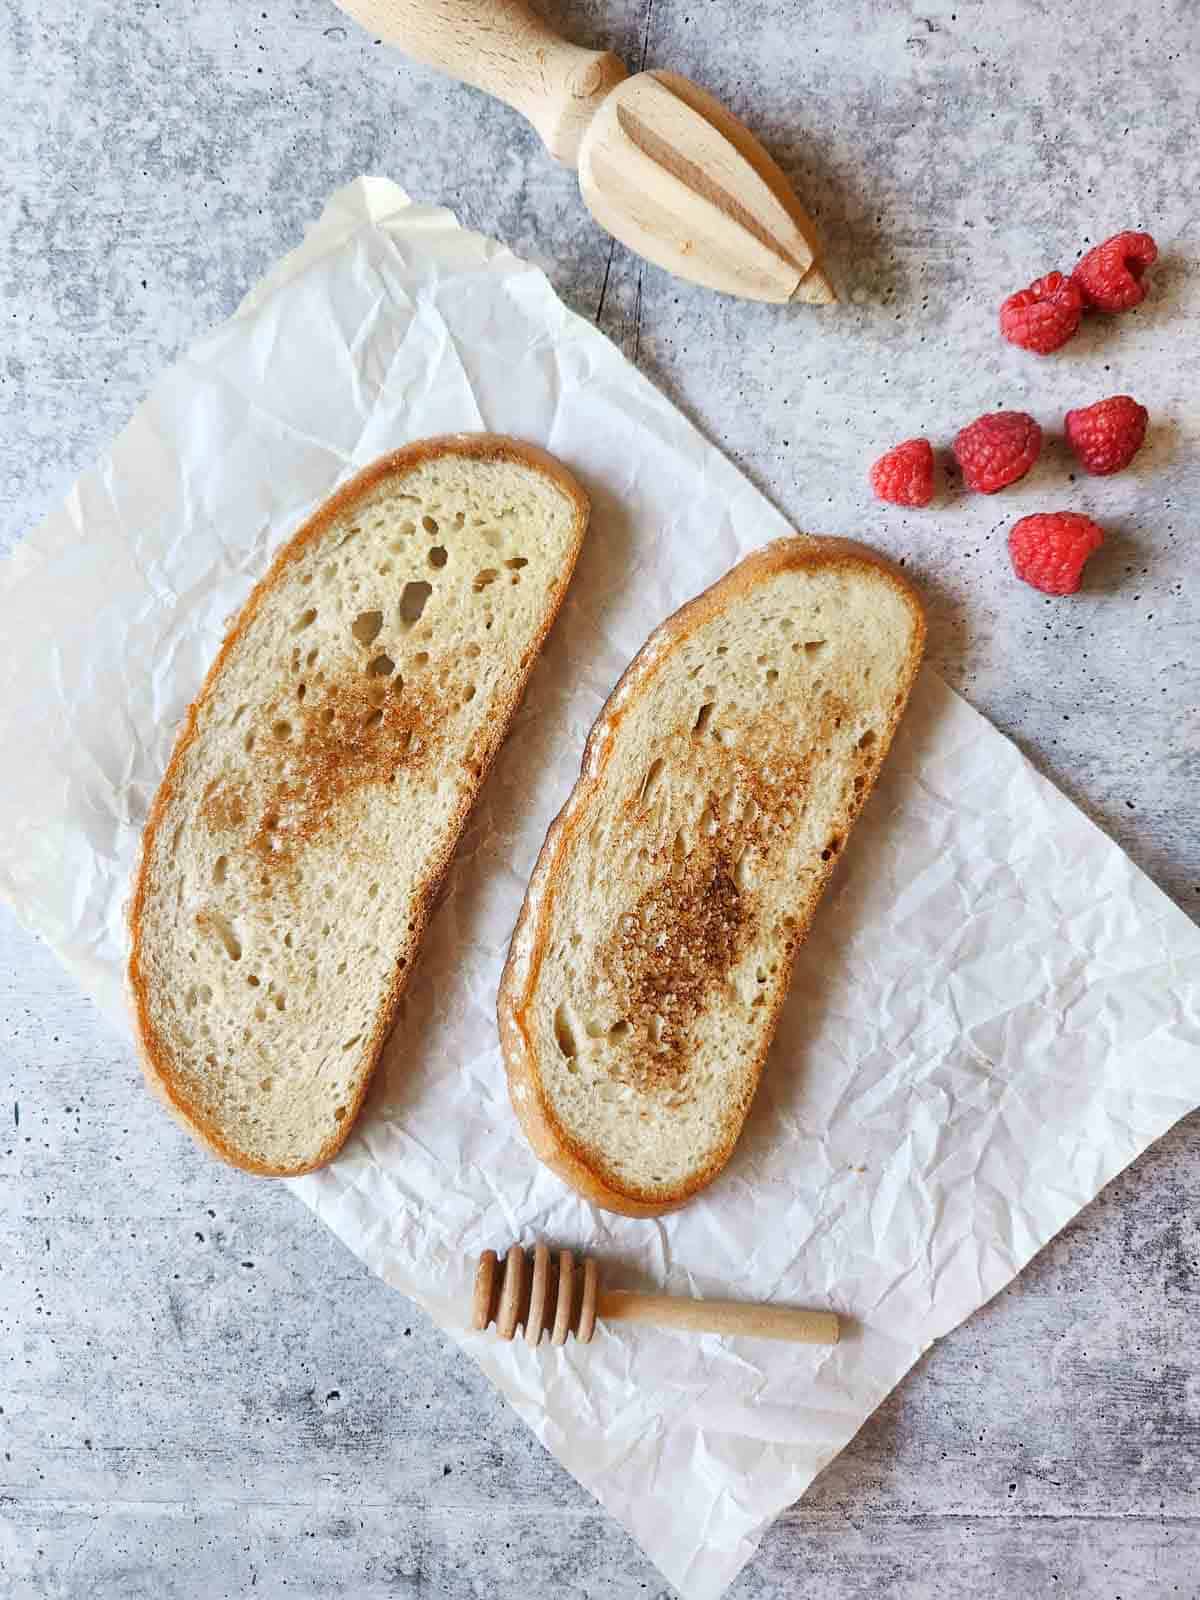 Two slices of toast on parchment paper with raspberries on the side.